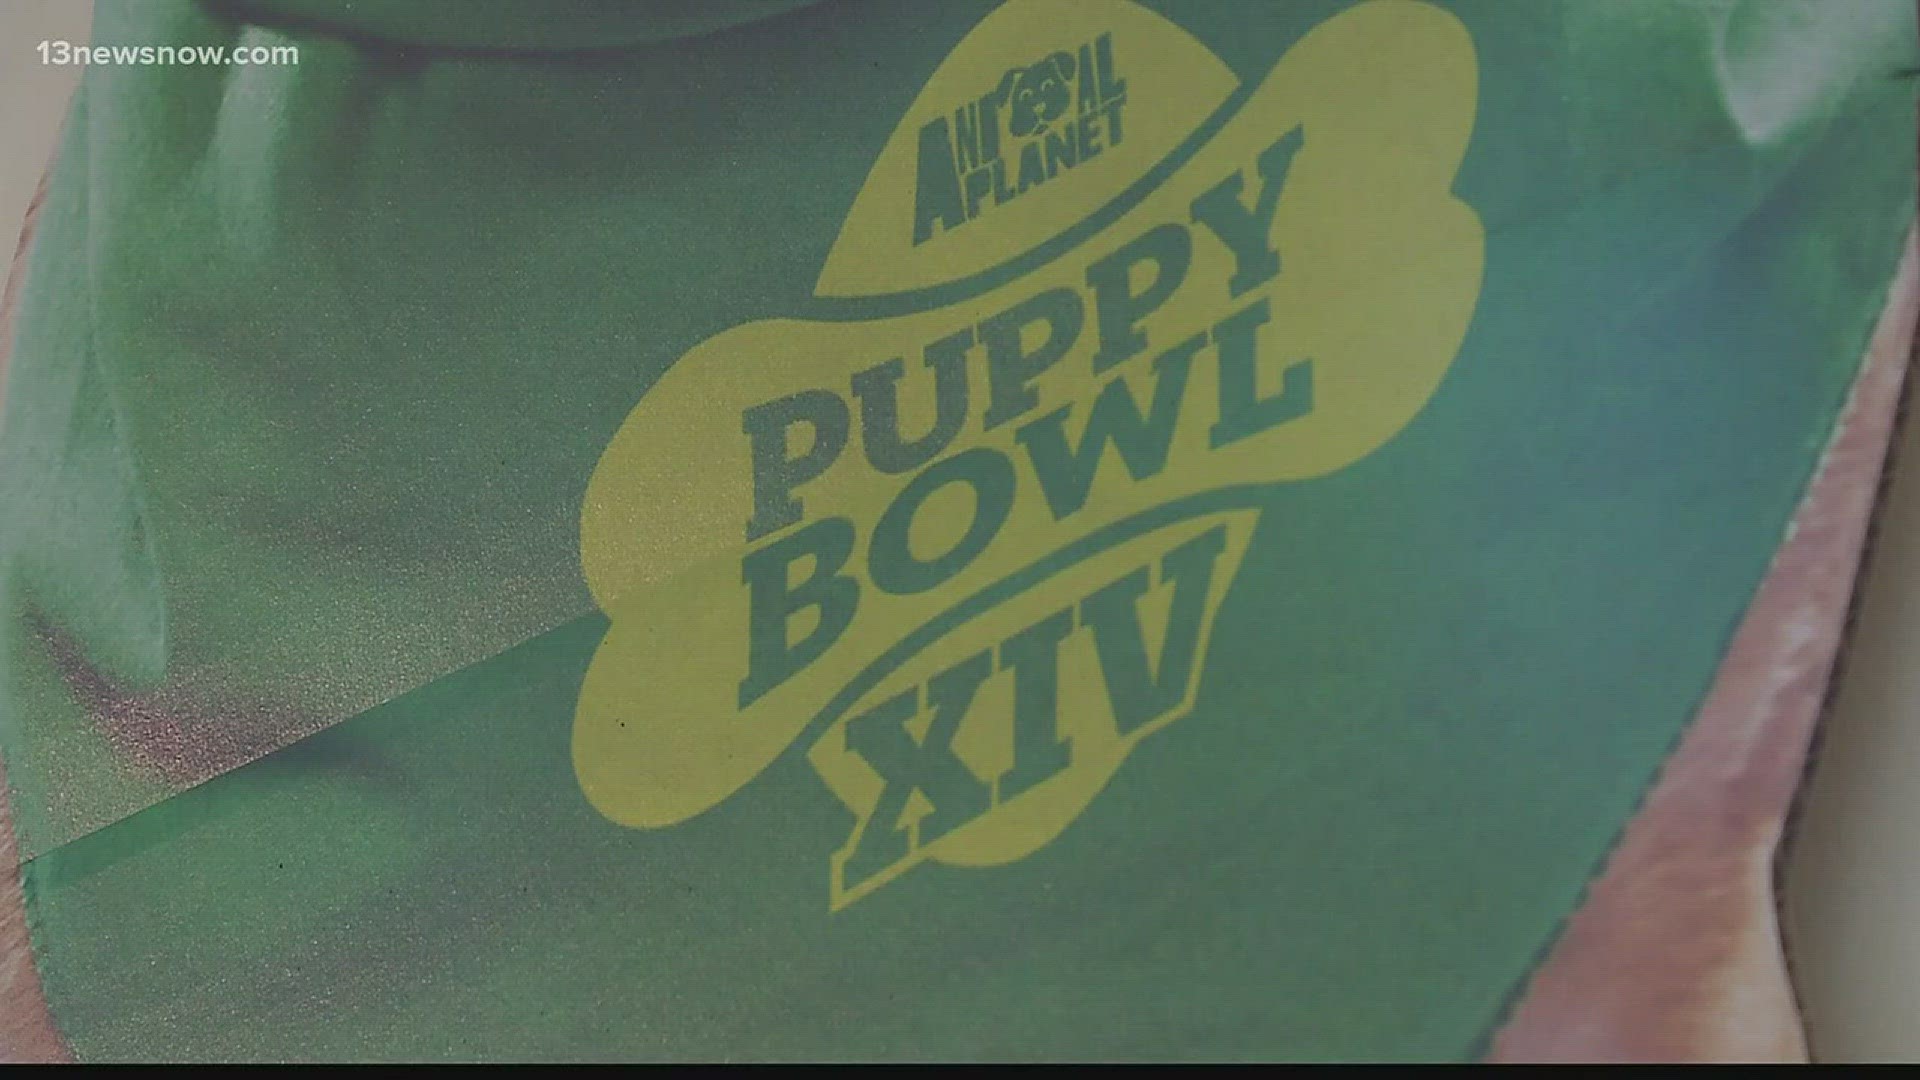 On February 4th the lights come on for the Puppy Bowl on Animal Planet